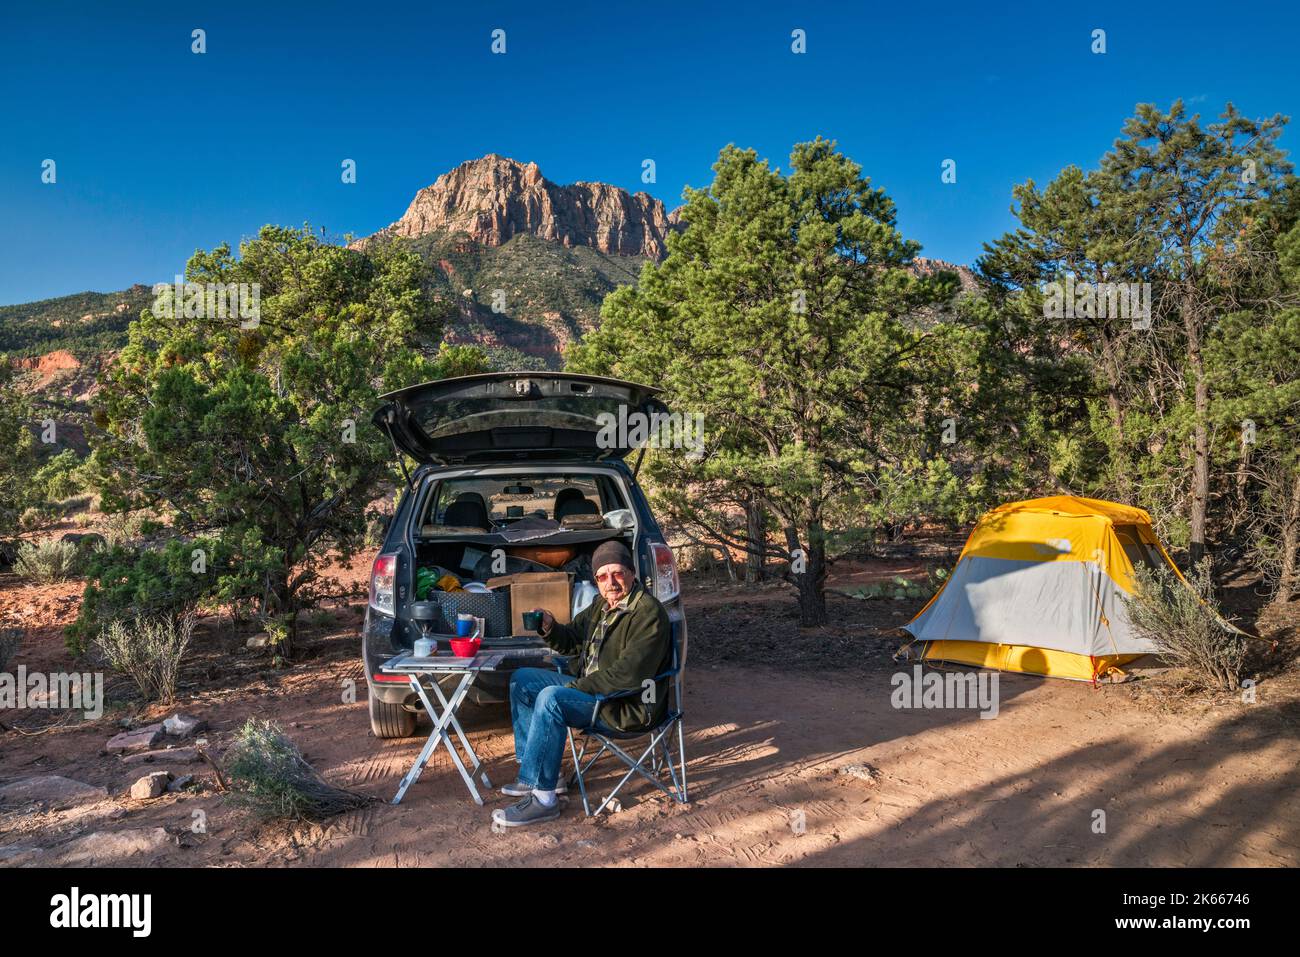 Senior man at campsite, pinyon juniper forest, Smithsonian Butte in distance, off Smithsonian Butte Road, Canaan Mountain Wilderness, Utah, USA Stock Photo